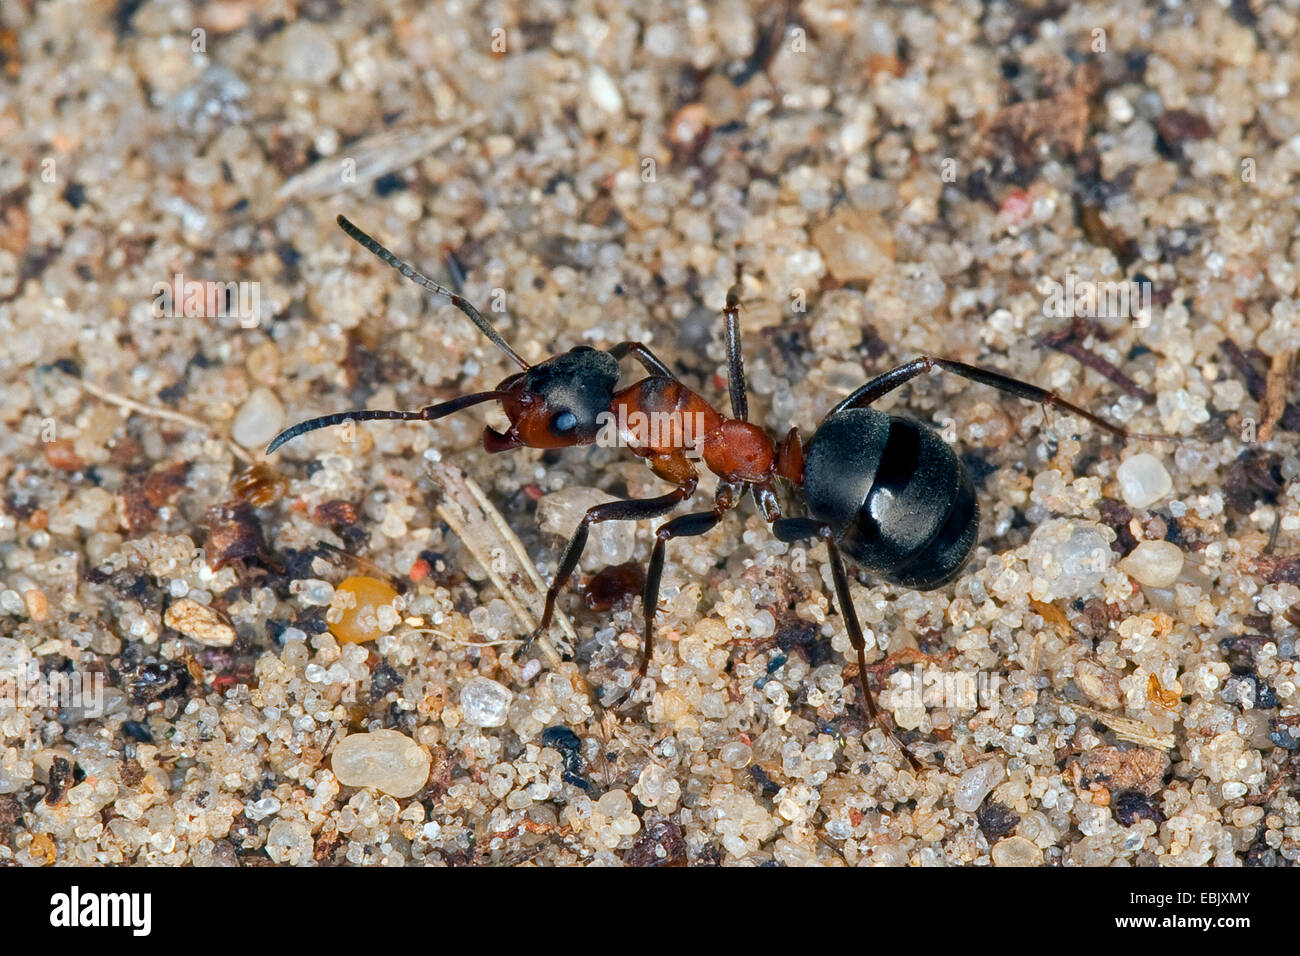 Wood Ants (Formica spec. ), Formica rufa or Formica polyctena, on the ground, Germany Stock Photo